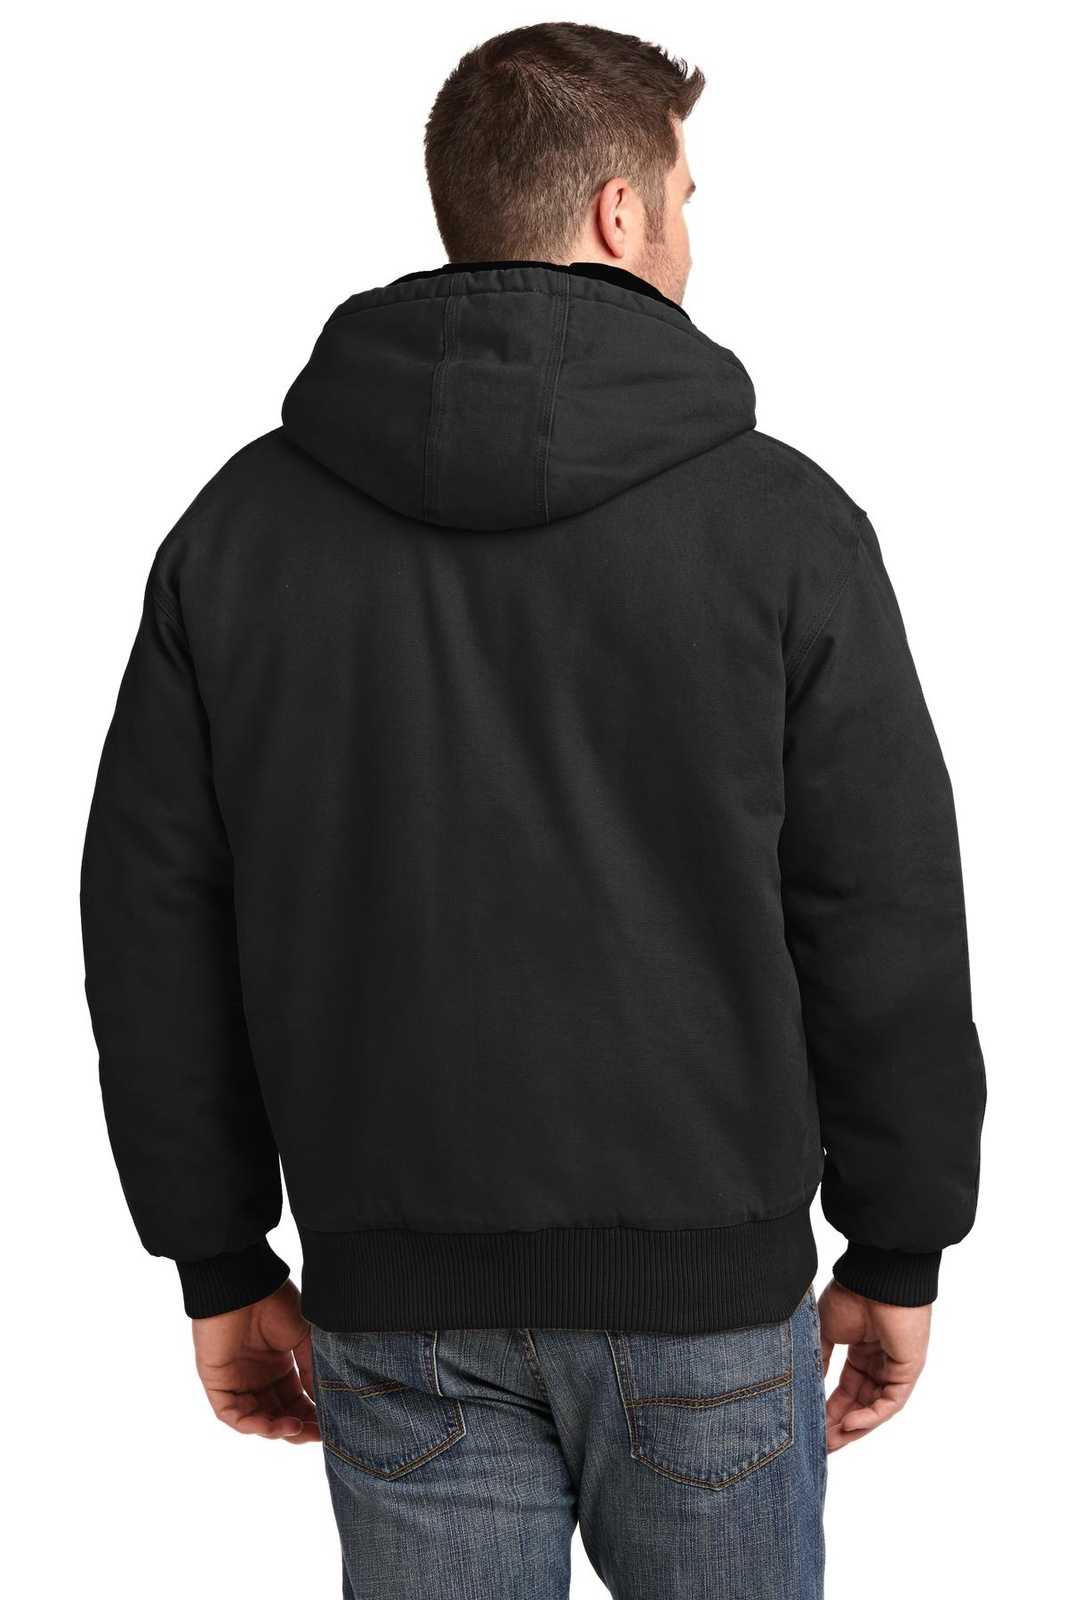 CornerStone CSJ41 Washed Duck Cloth Insulated Hooded Work Jacket - Black - HIT a Double - 2